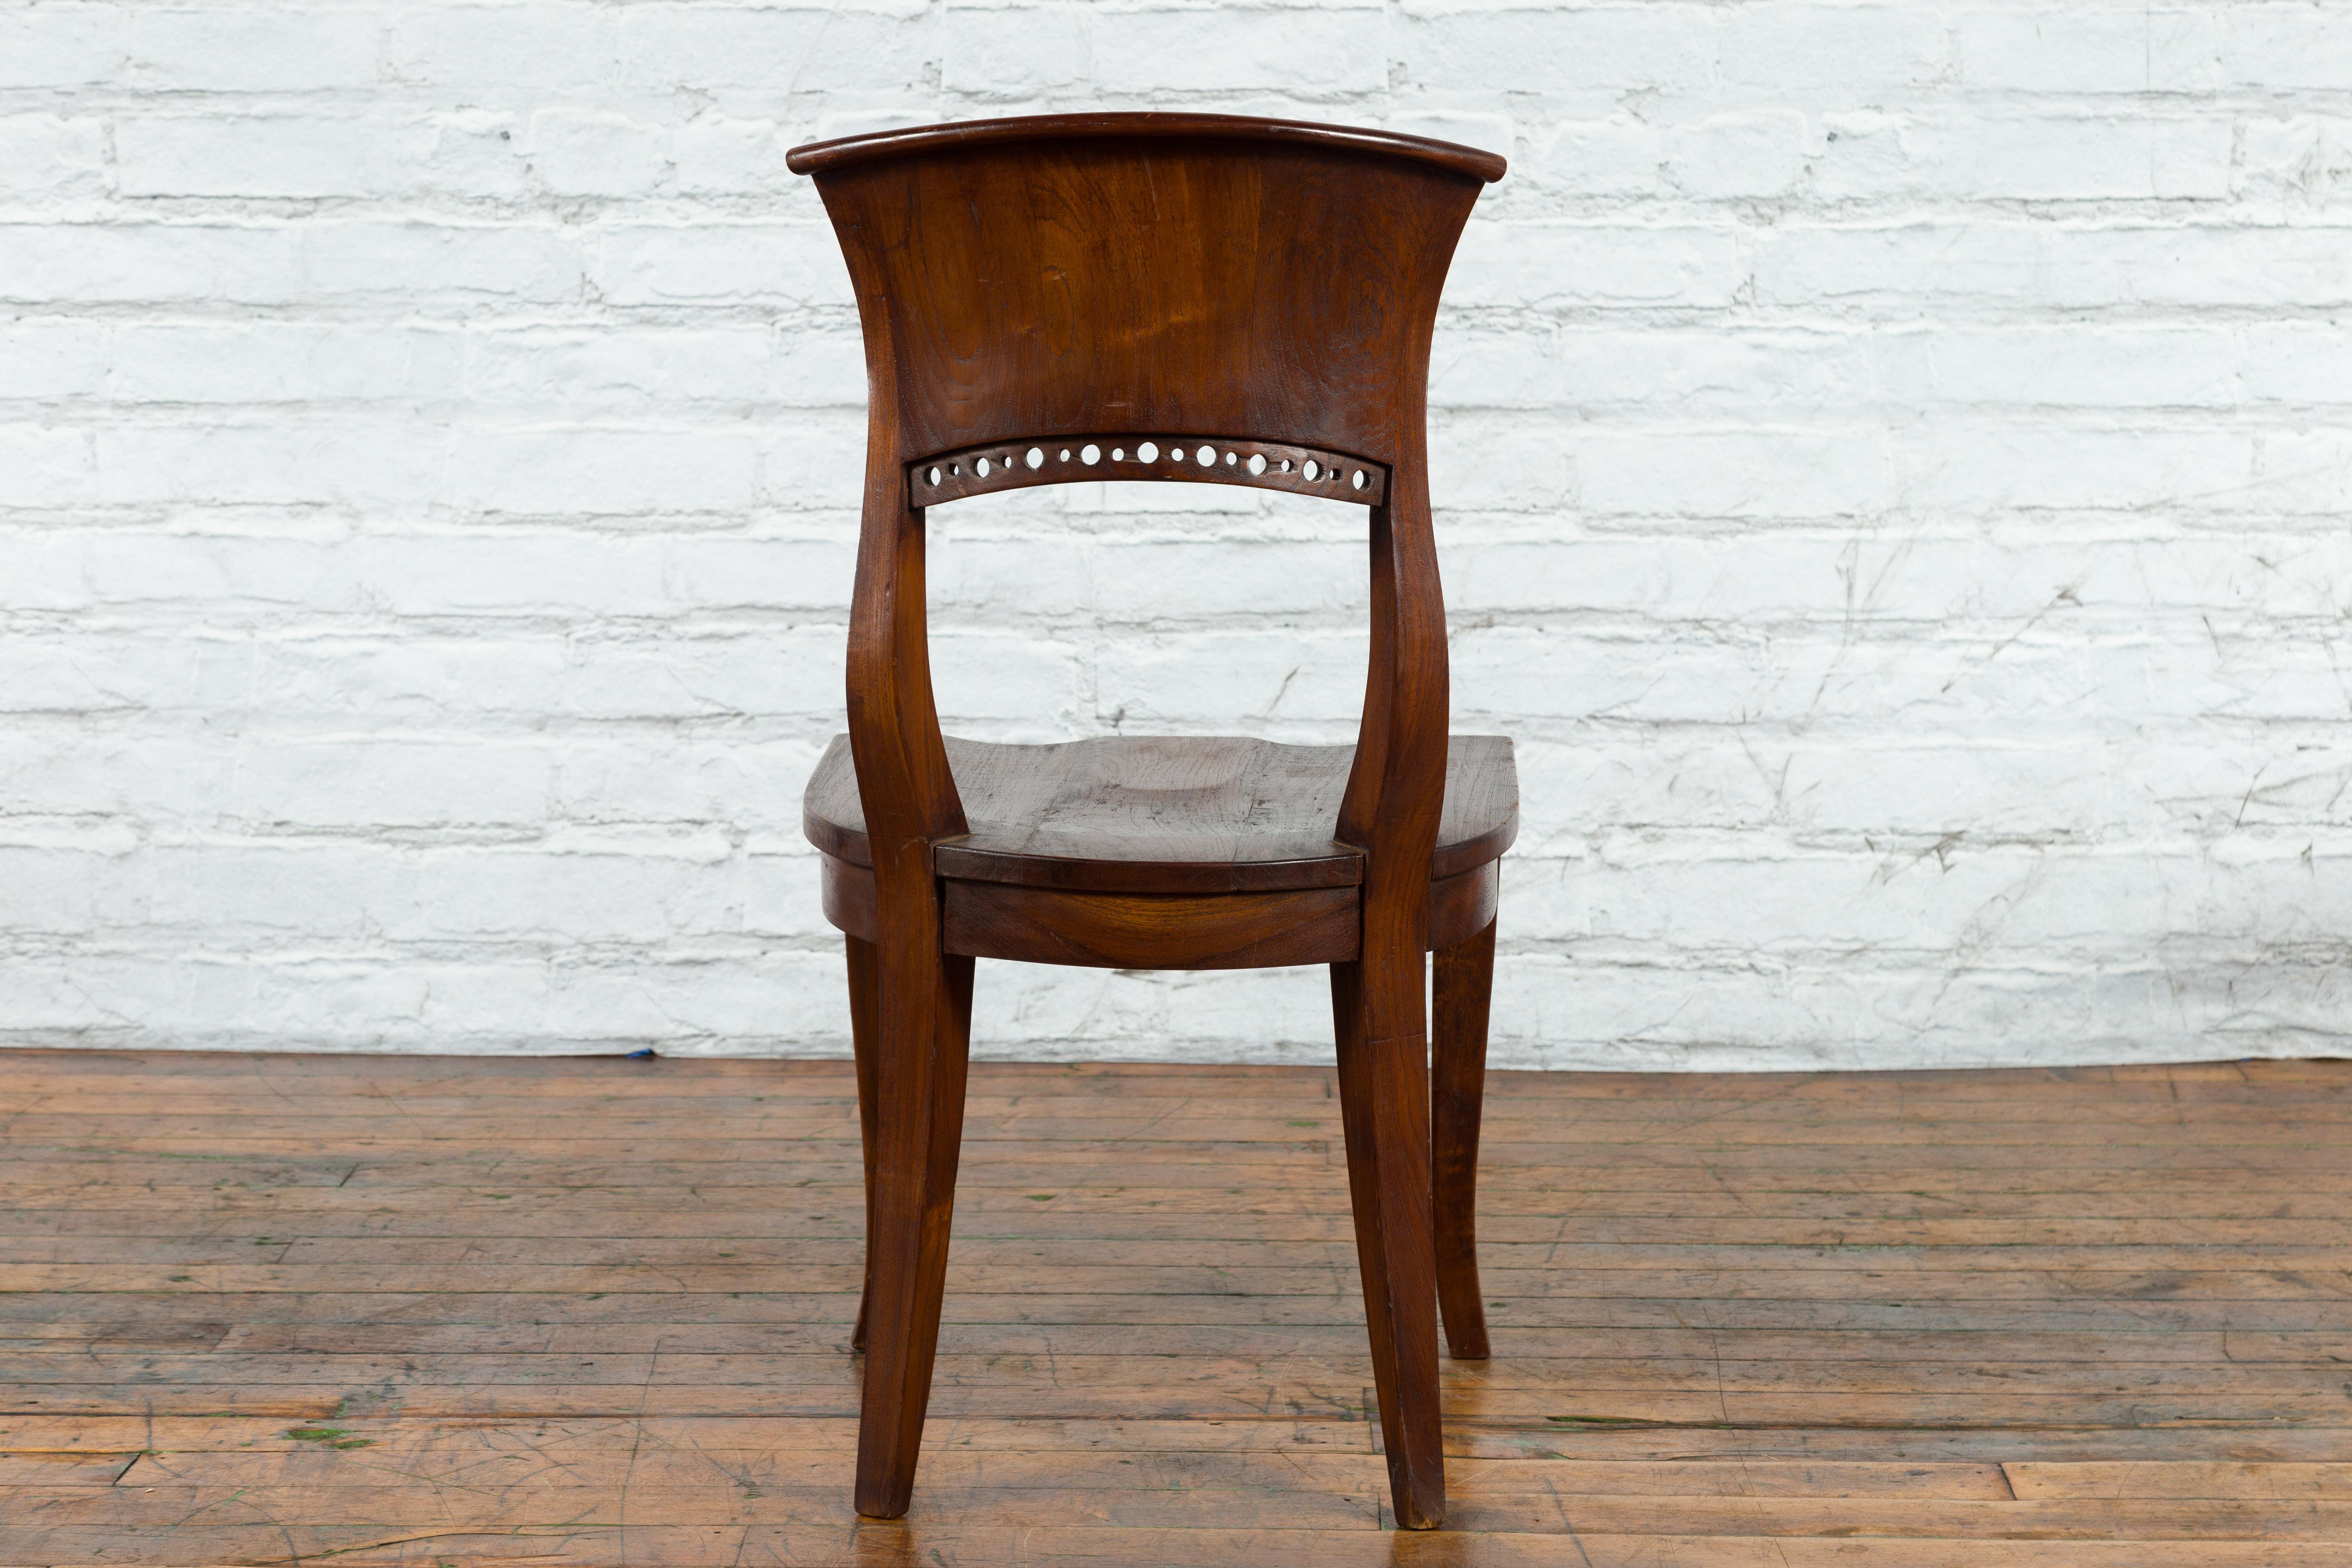 Vintage Indonesia Wooden Accent Chair with Pierced Circular Motifs Curving Back For Sale 2